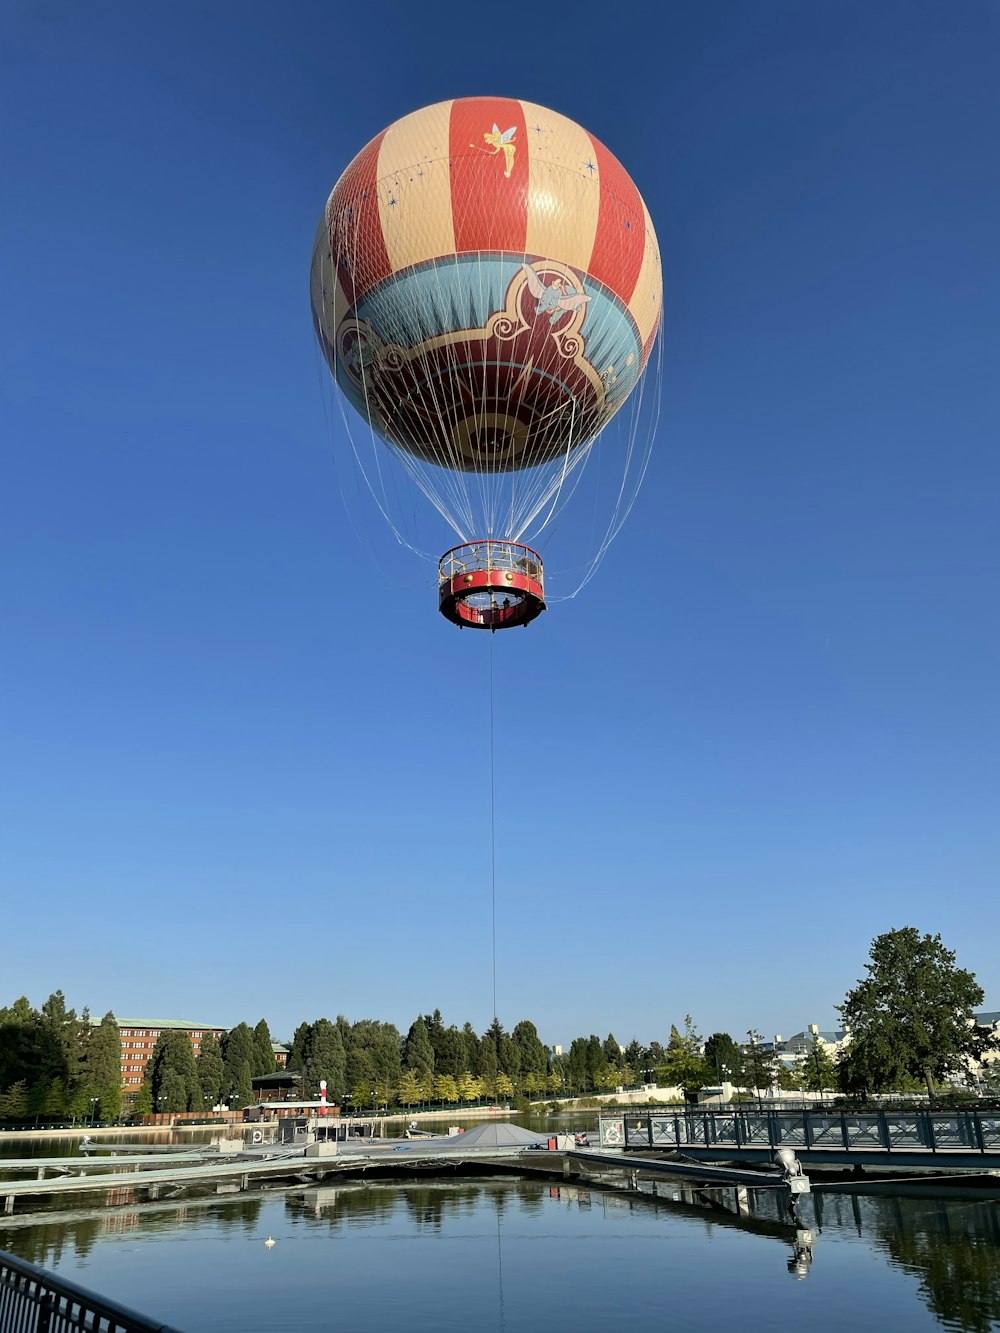 red and white hot air balloon in mid air during daytime